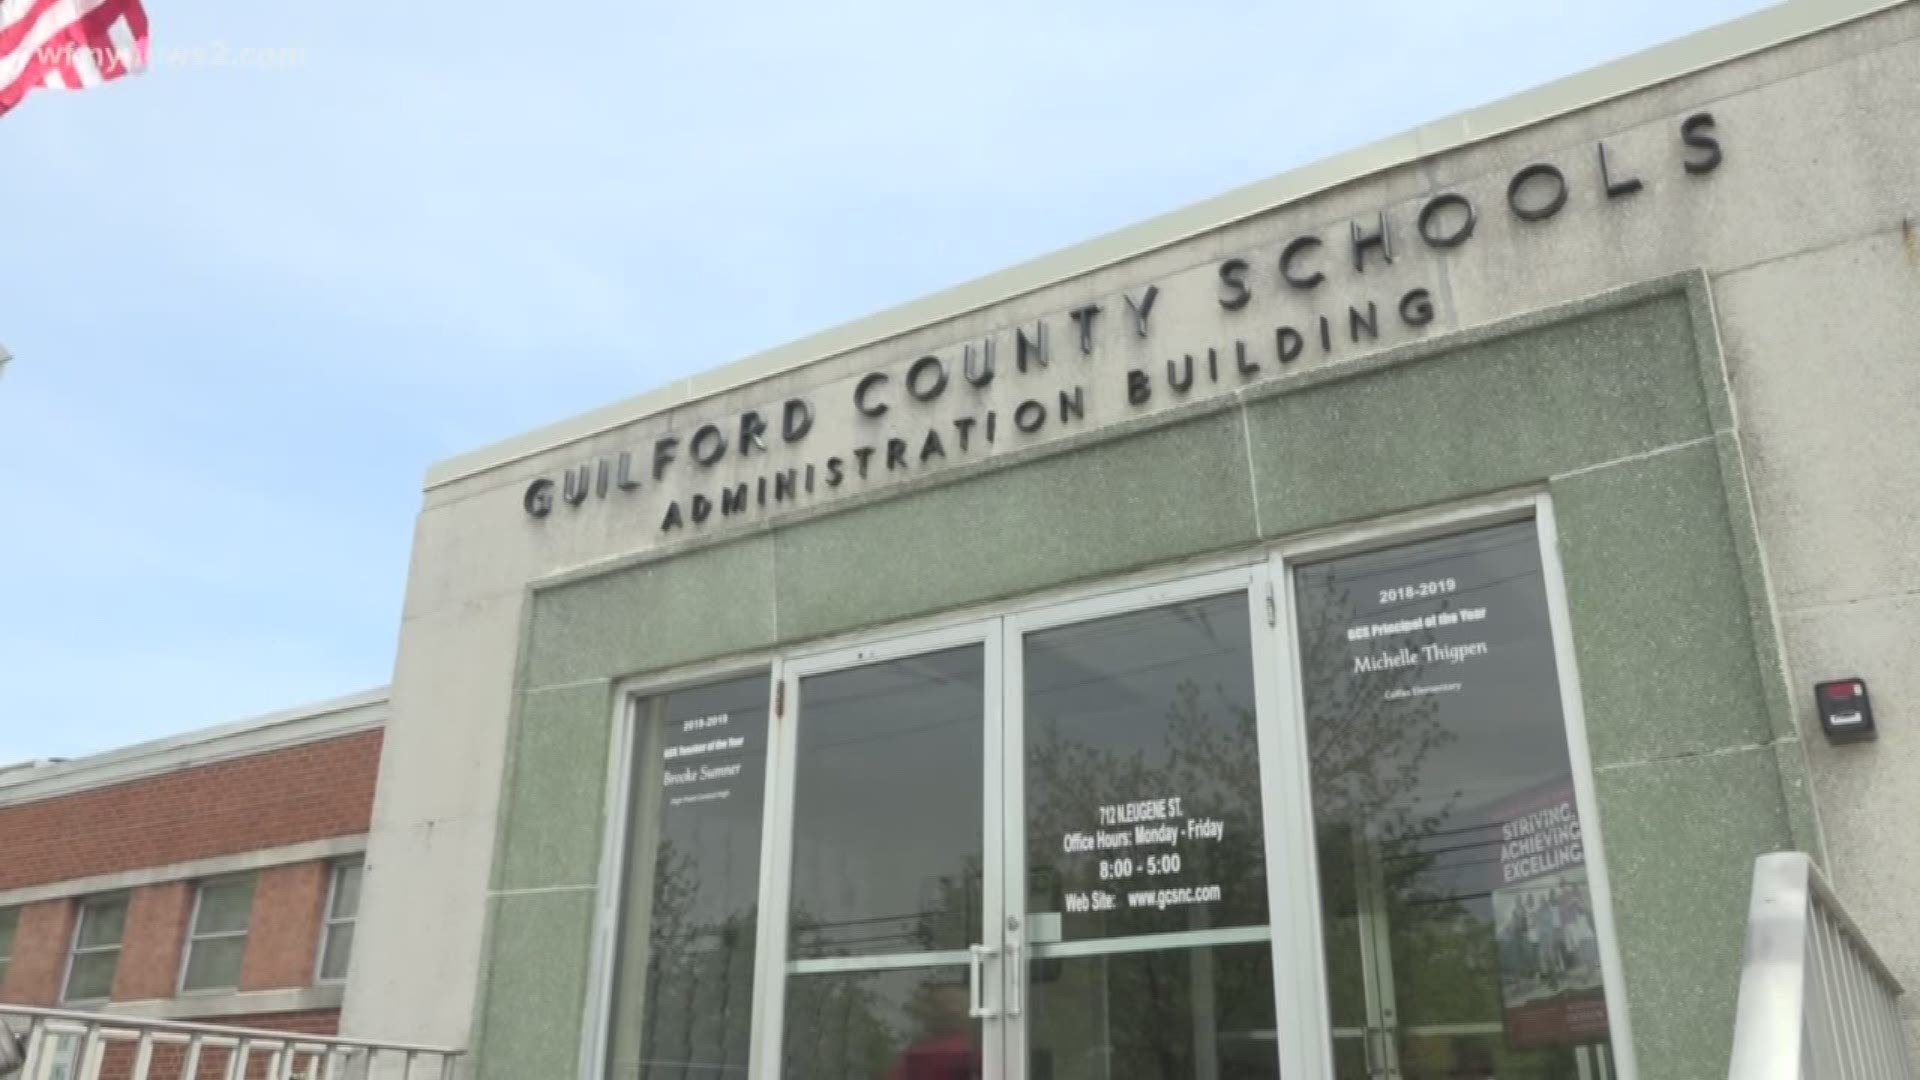 Guilford County Schools says kids coming to school five minutes earlier will give the district a safety net to help with inclement weather issues this year.